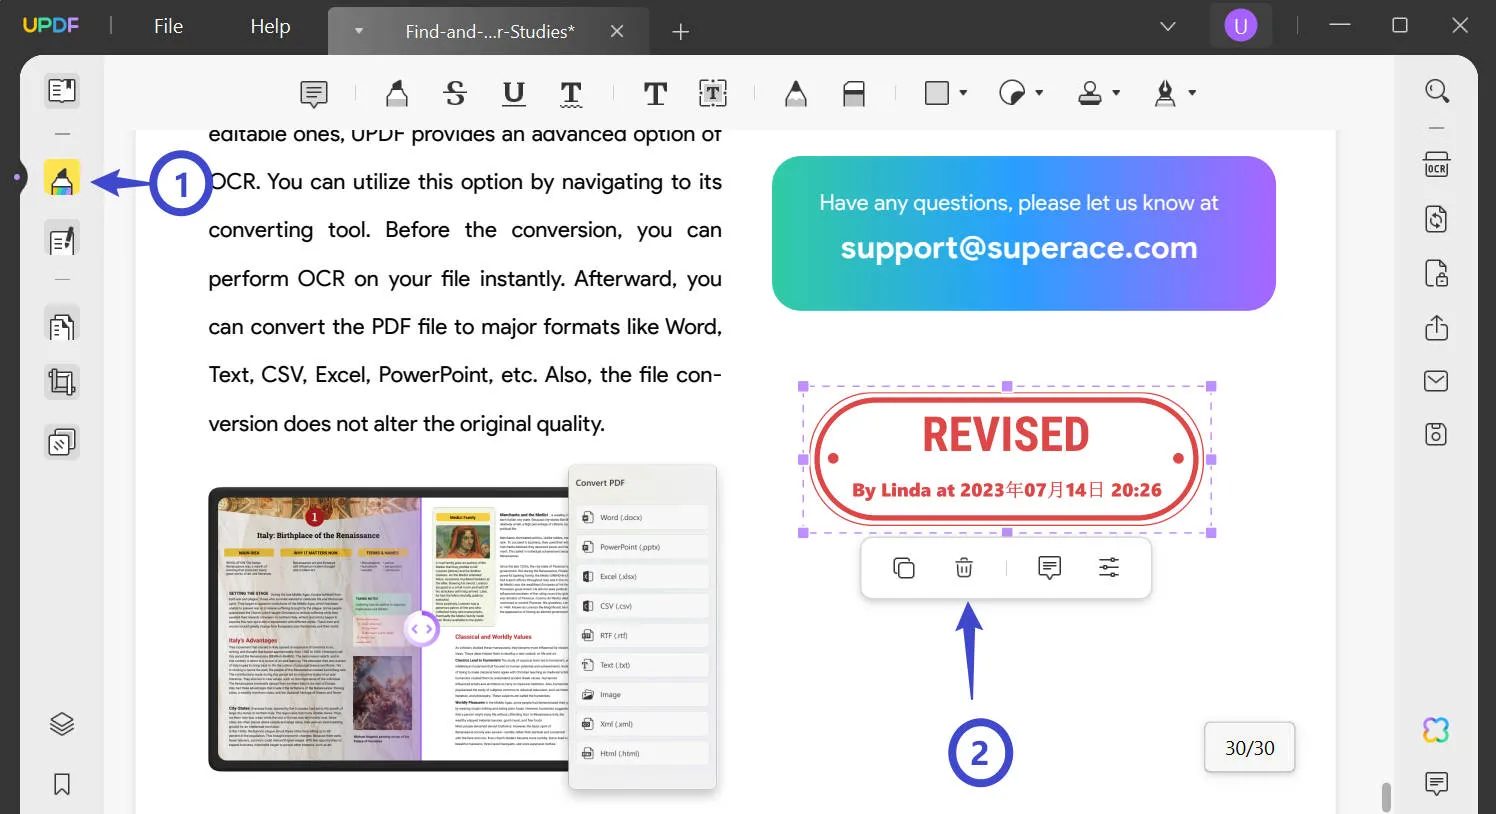 How to Remove Stamp from PDF? Step-by-Step Instructions